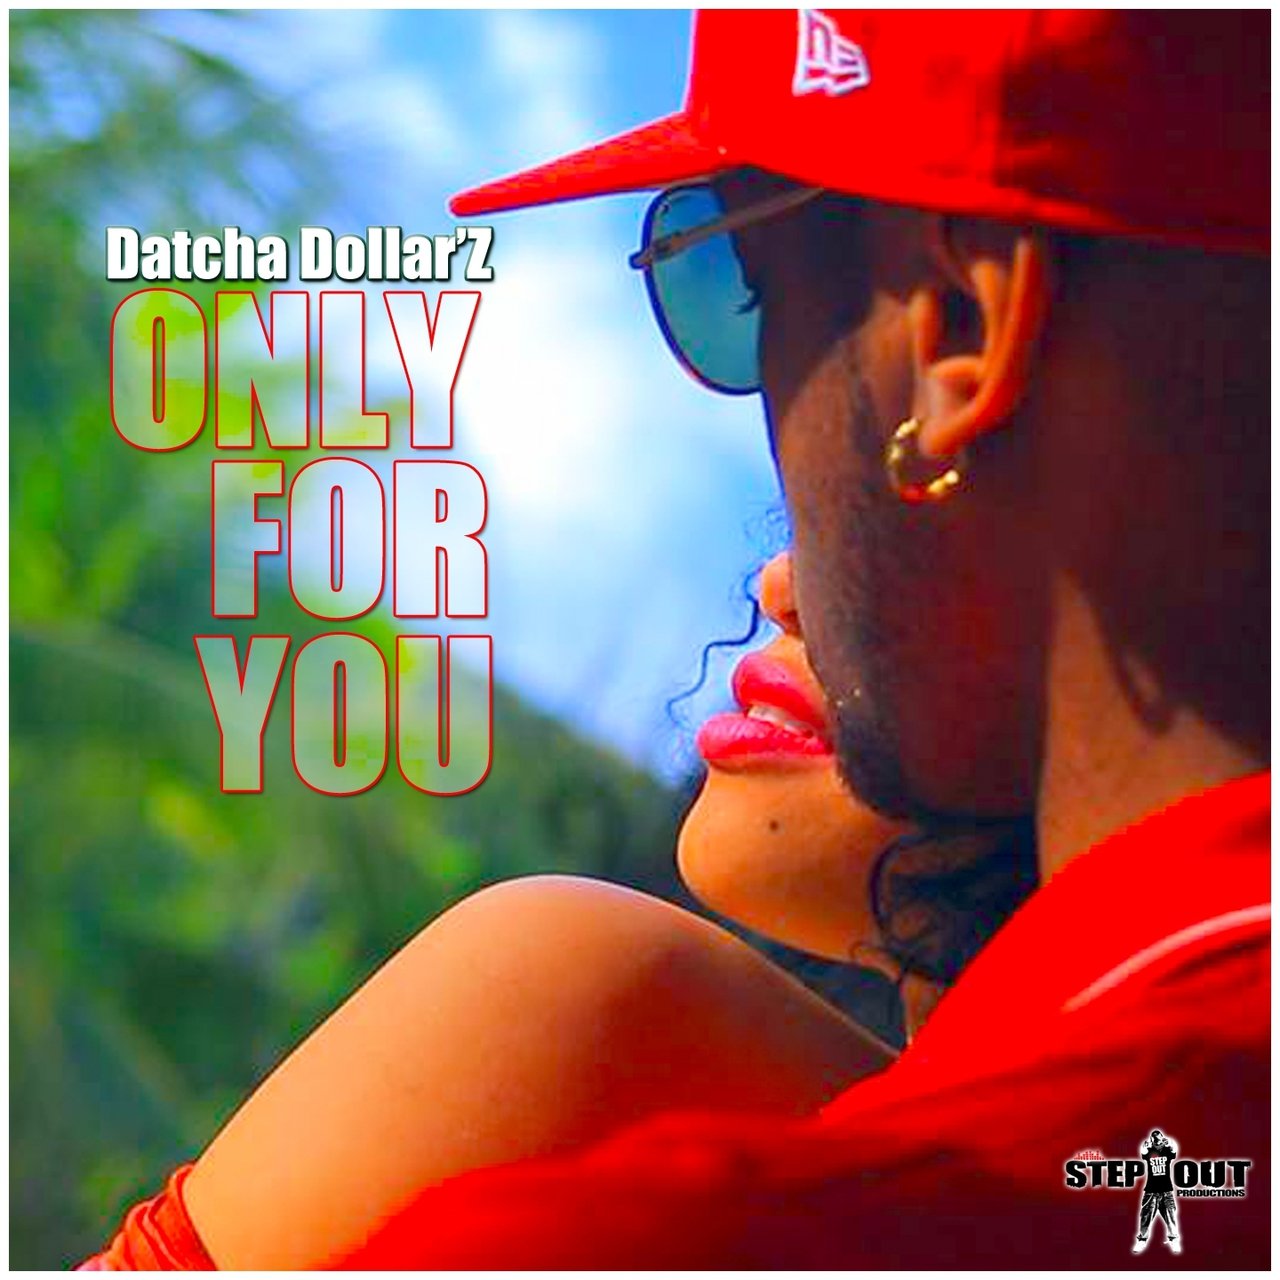 Only a z. Only you обложка картинки. Only for you. Сборник. Datcha Studio (CD).